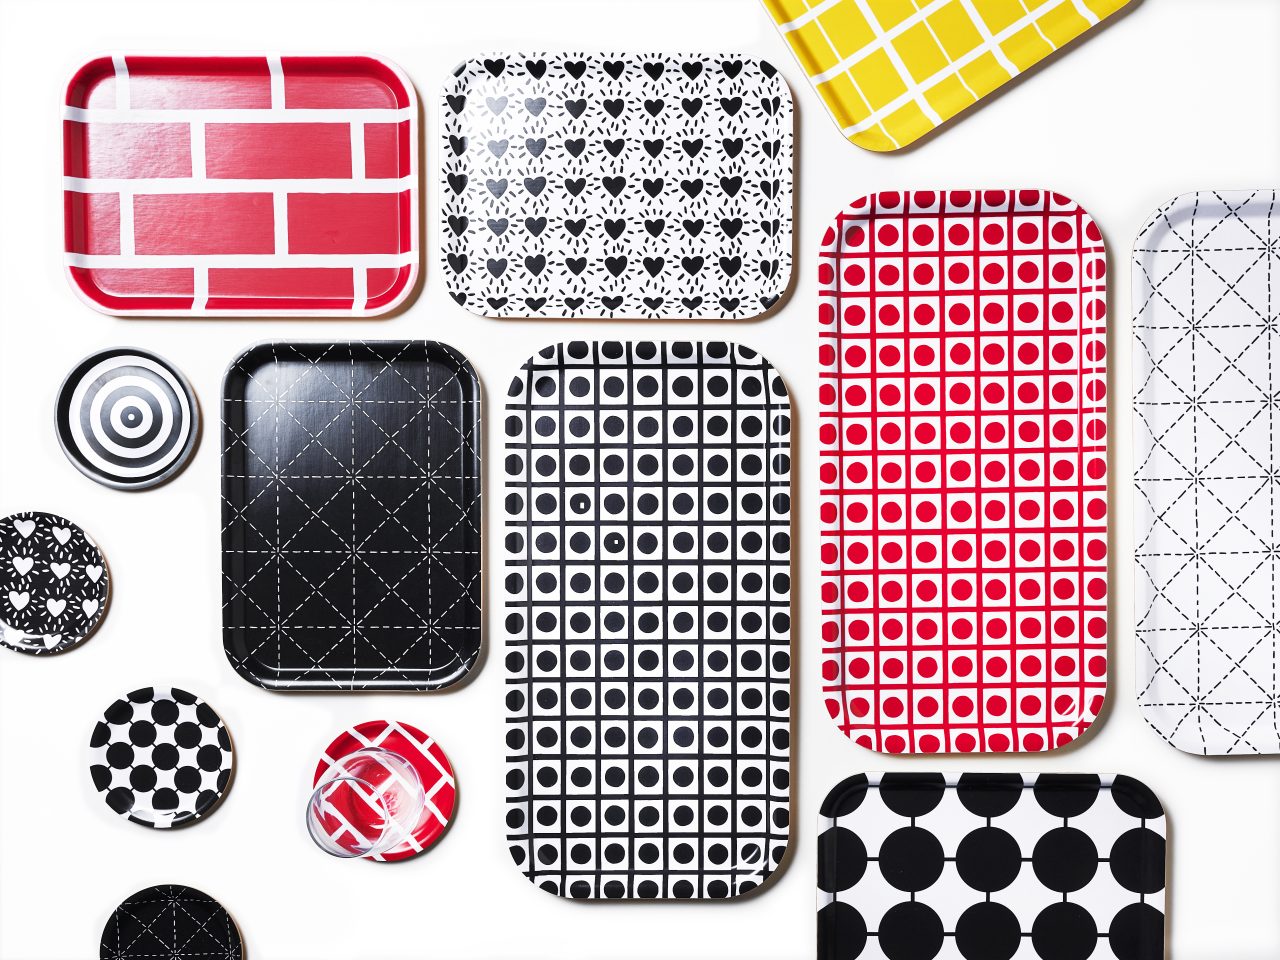 Trays and coasters in different sizes and graphic patterns in red/white, black/white, grey/white and yellow/white.